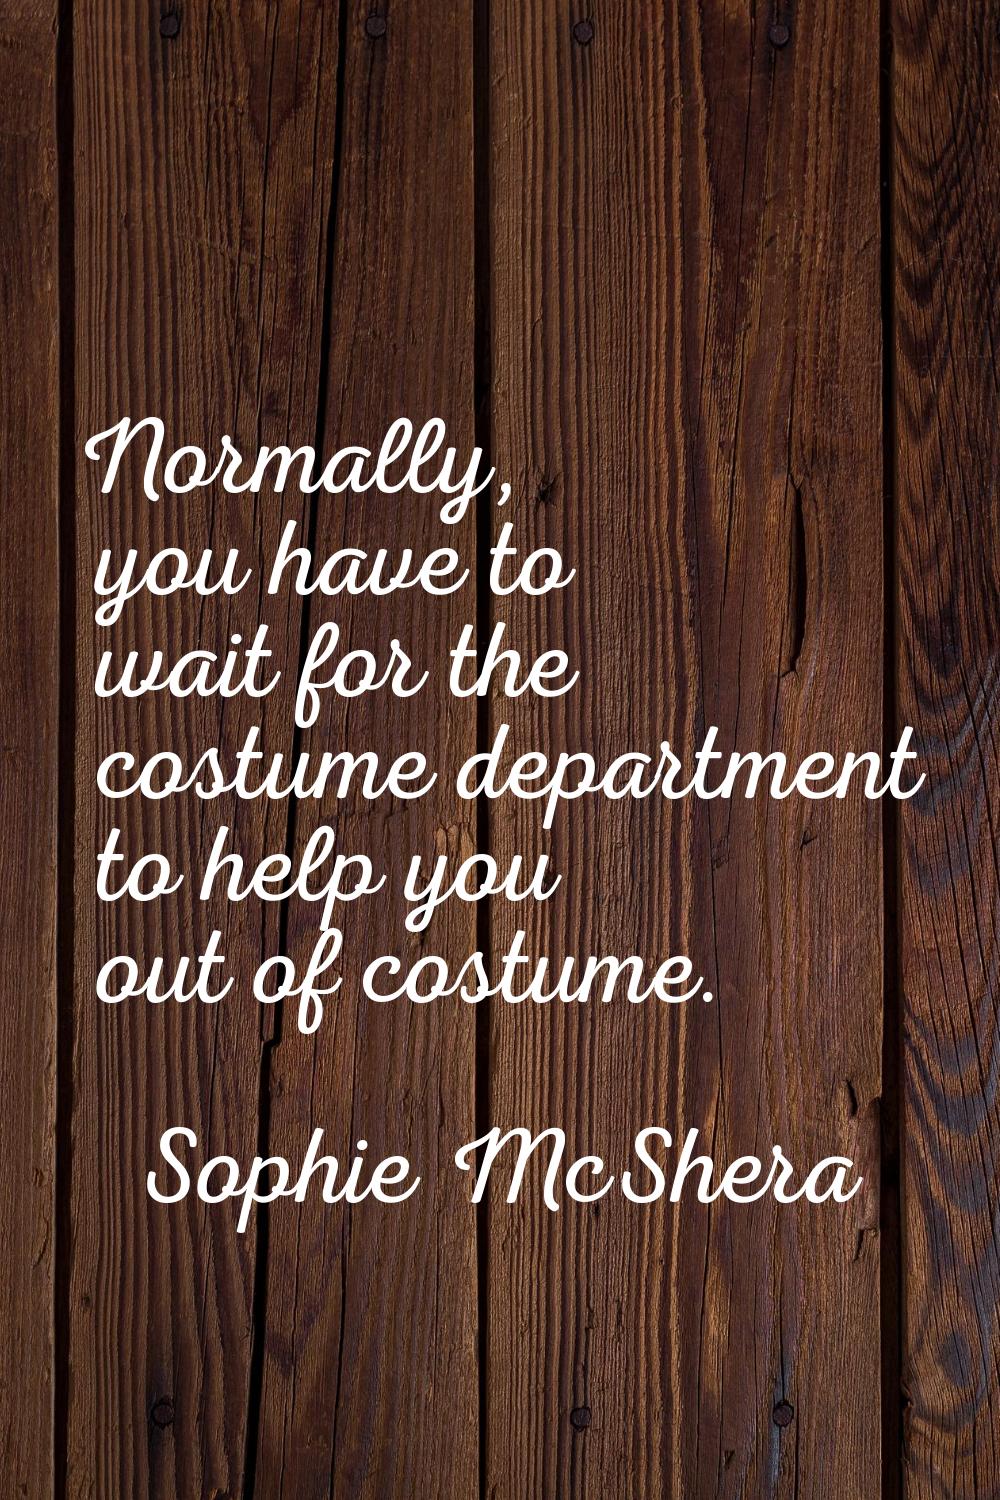 Normally, you have to wait for the costume department to help you out of costume.